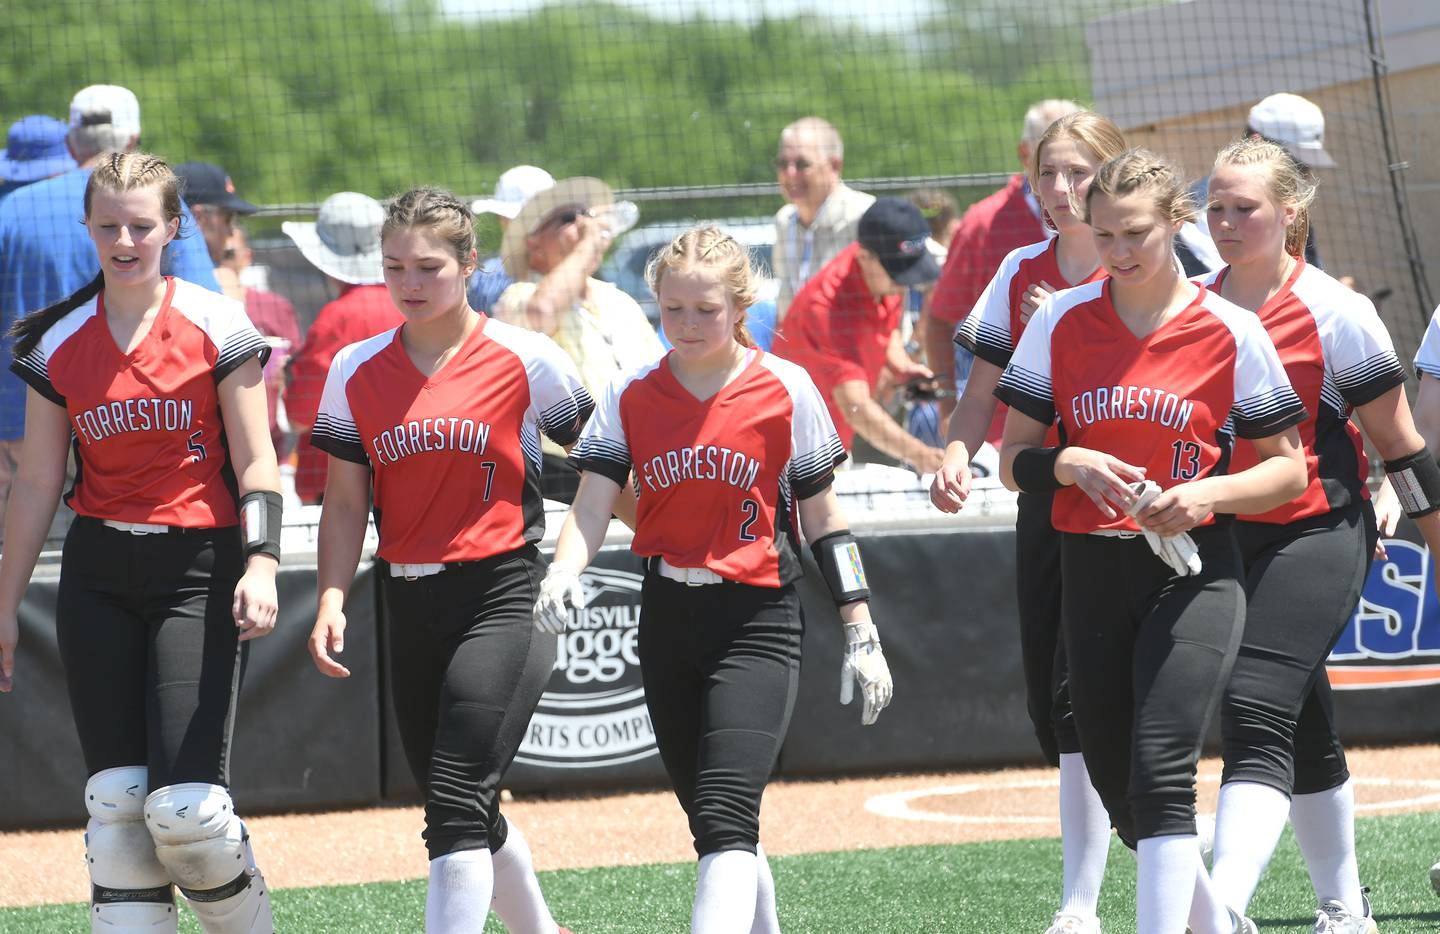 Forreston's Hailey Greenfield, Brooke Boettner, Alaina Miller, Jenna Greenfield, Kara Erdmann, and Aubrey Sanders walk off the field toward their dugout after falling to Casey-Westfield 4-0 in semifinal action at the 1A softball finals in Peoria on Friday, June 3.